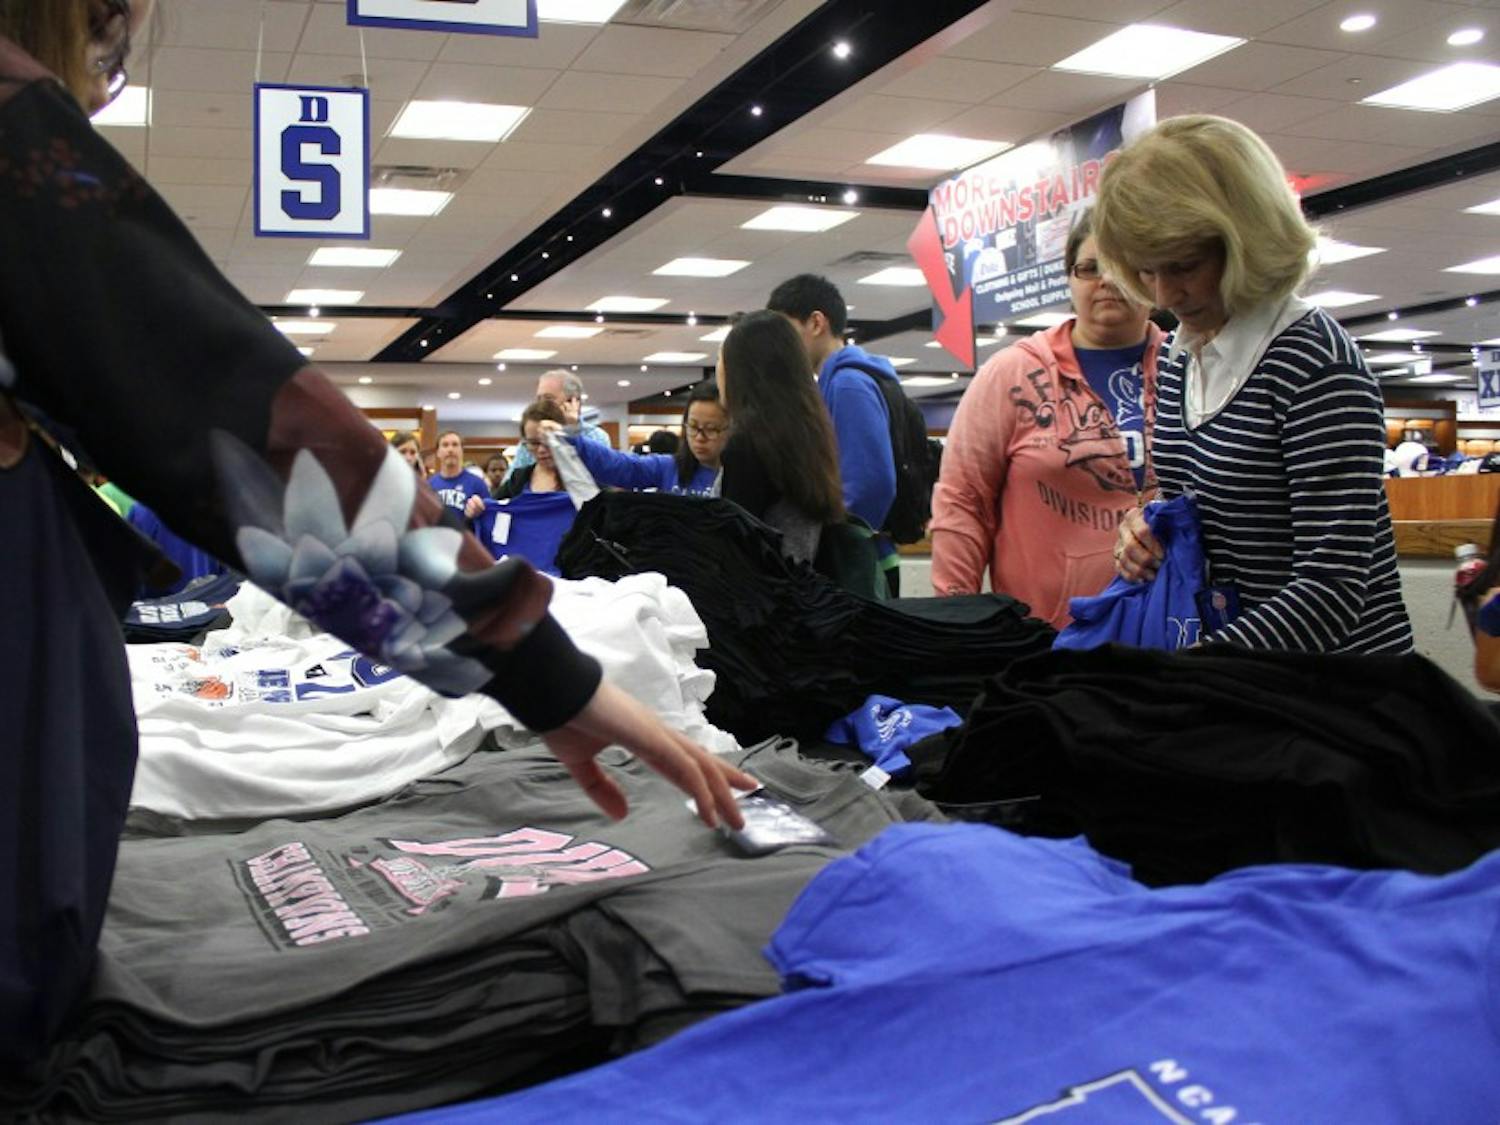 After Monday night's win, students and visitors poured into the University Store Tuesday to buy championship apparel.